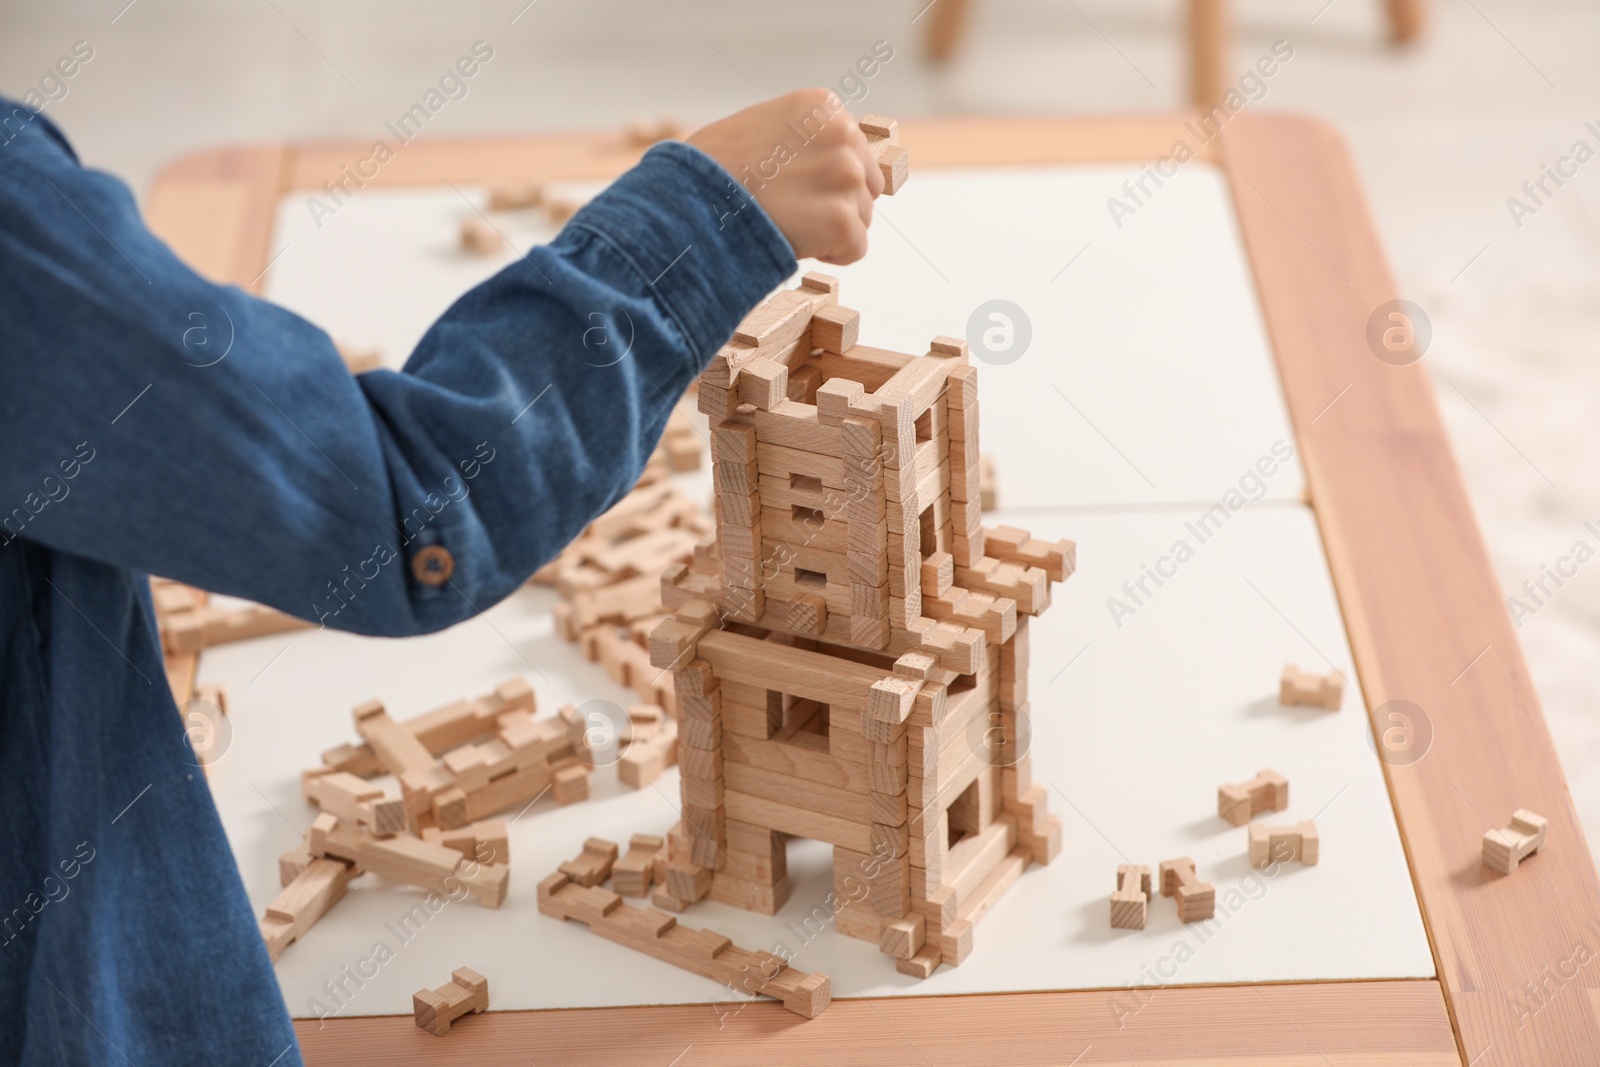 Photo of Little boy playing with wooden tower at table indoors, closeup. Child's toy